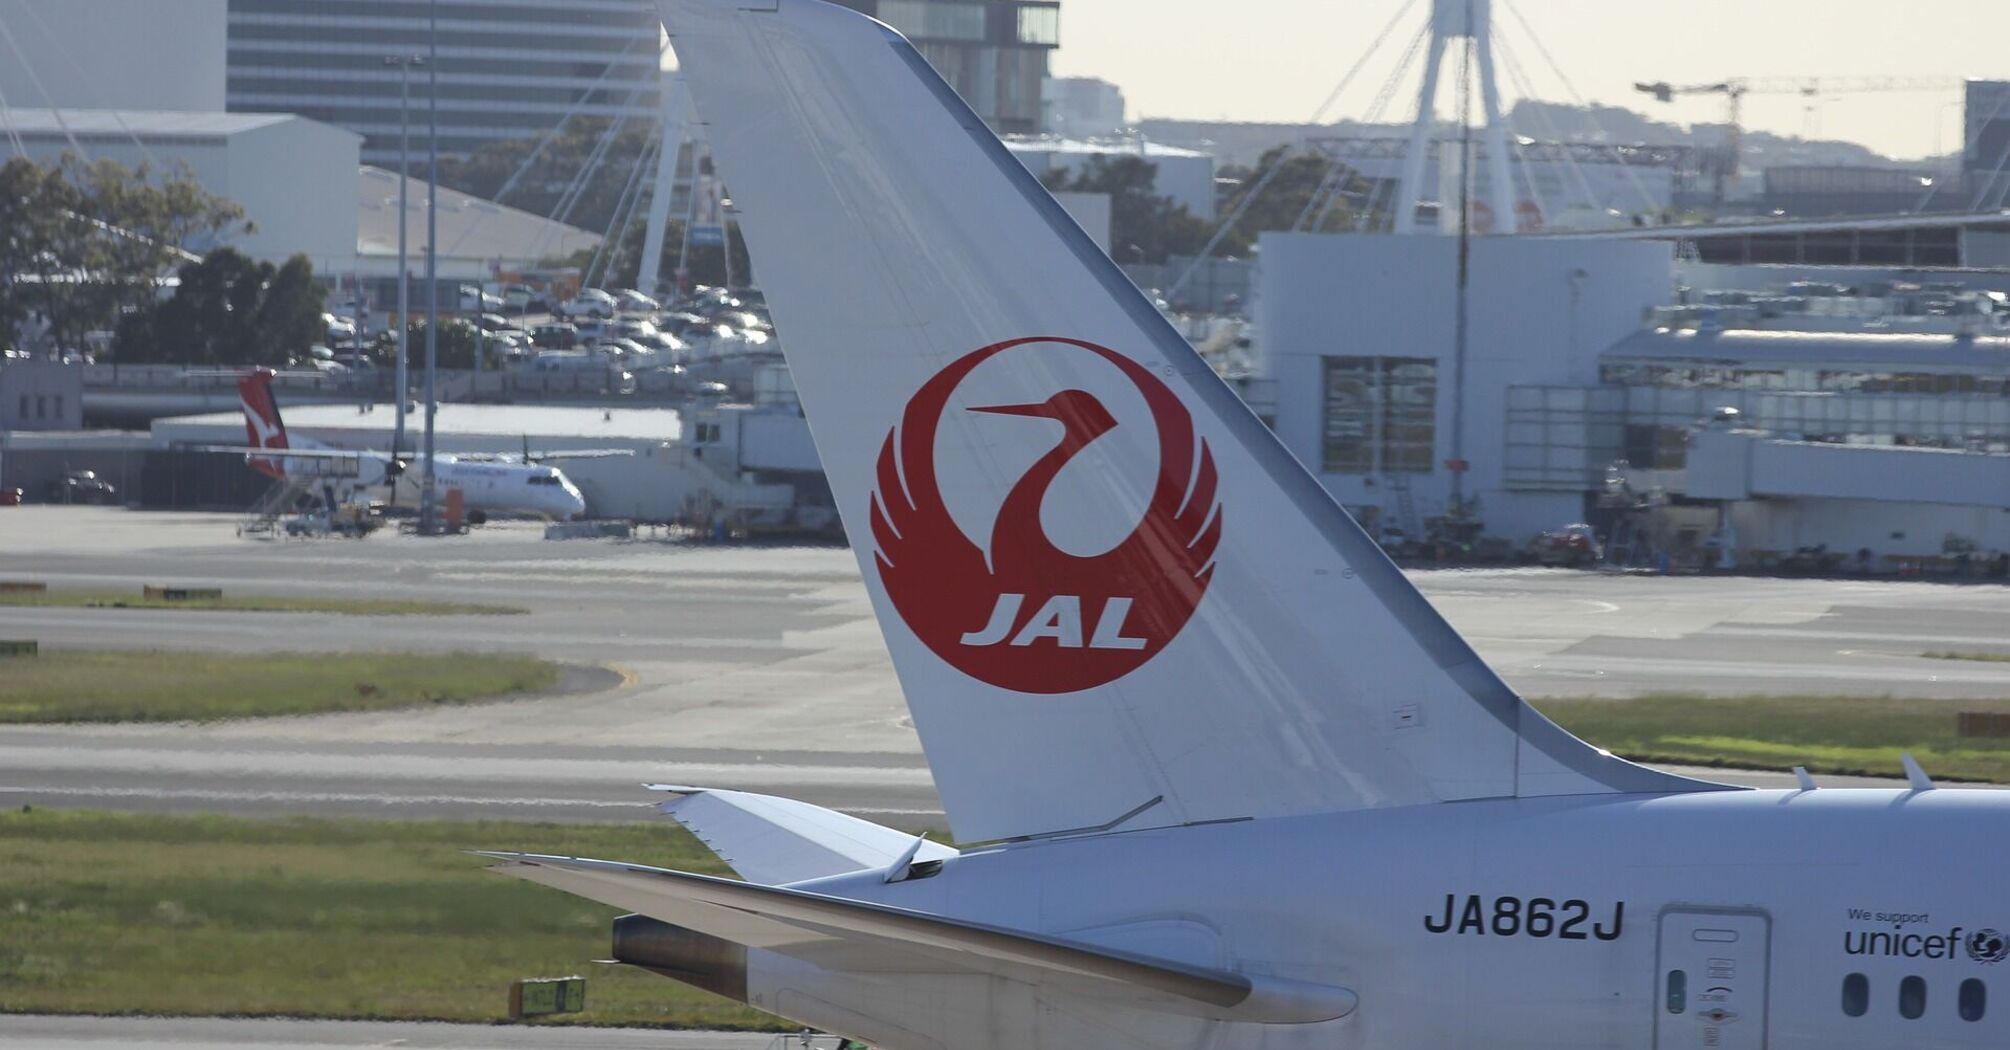 Japan Airlines (JAL) aircraft tail with logo at the airport